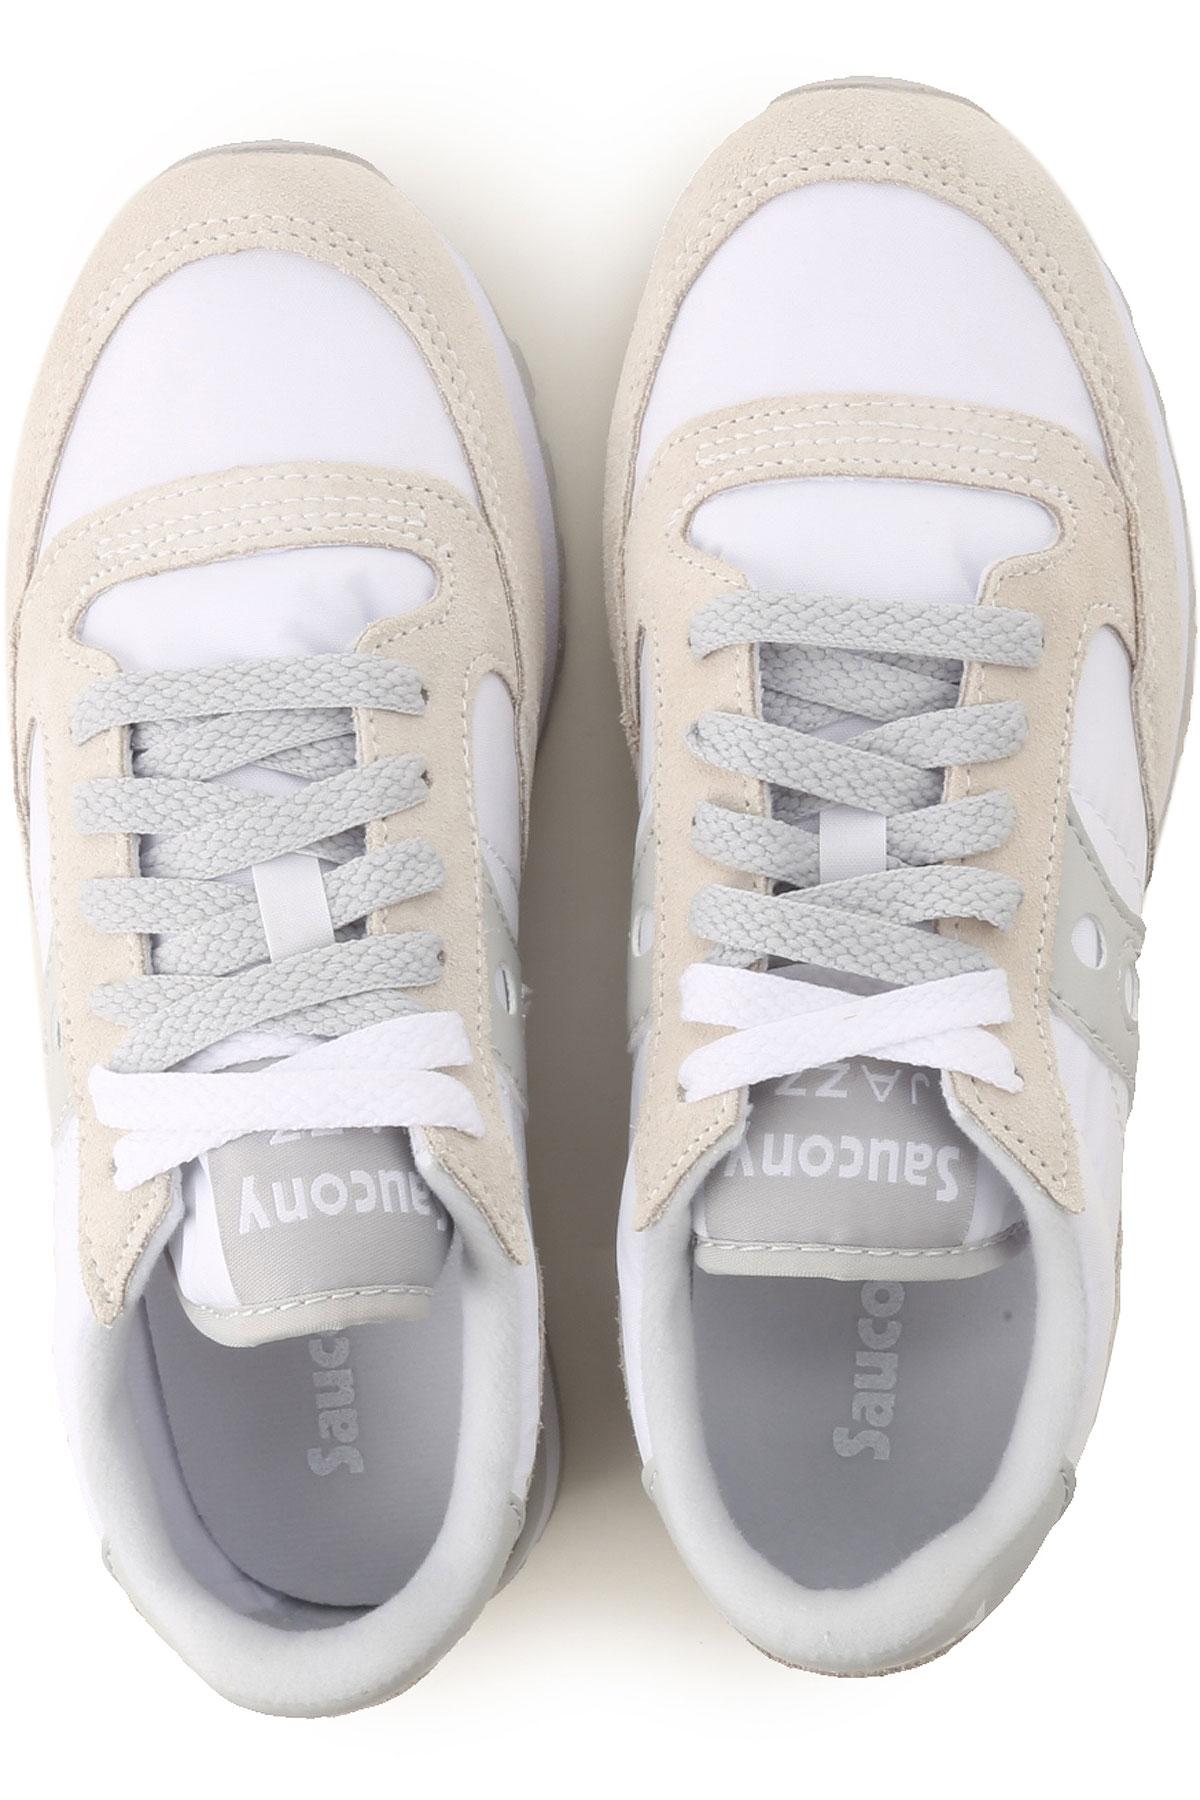 Saucony Synthetic Sneakers For Women On Sale in White - Lyst